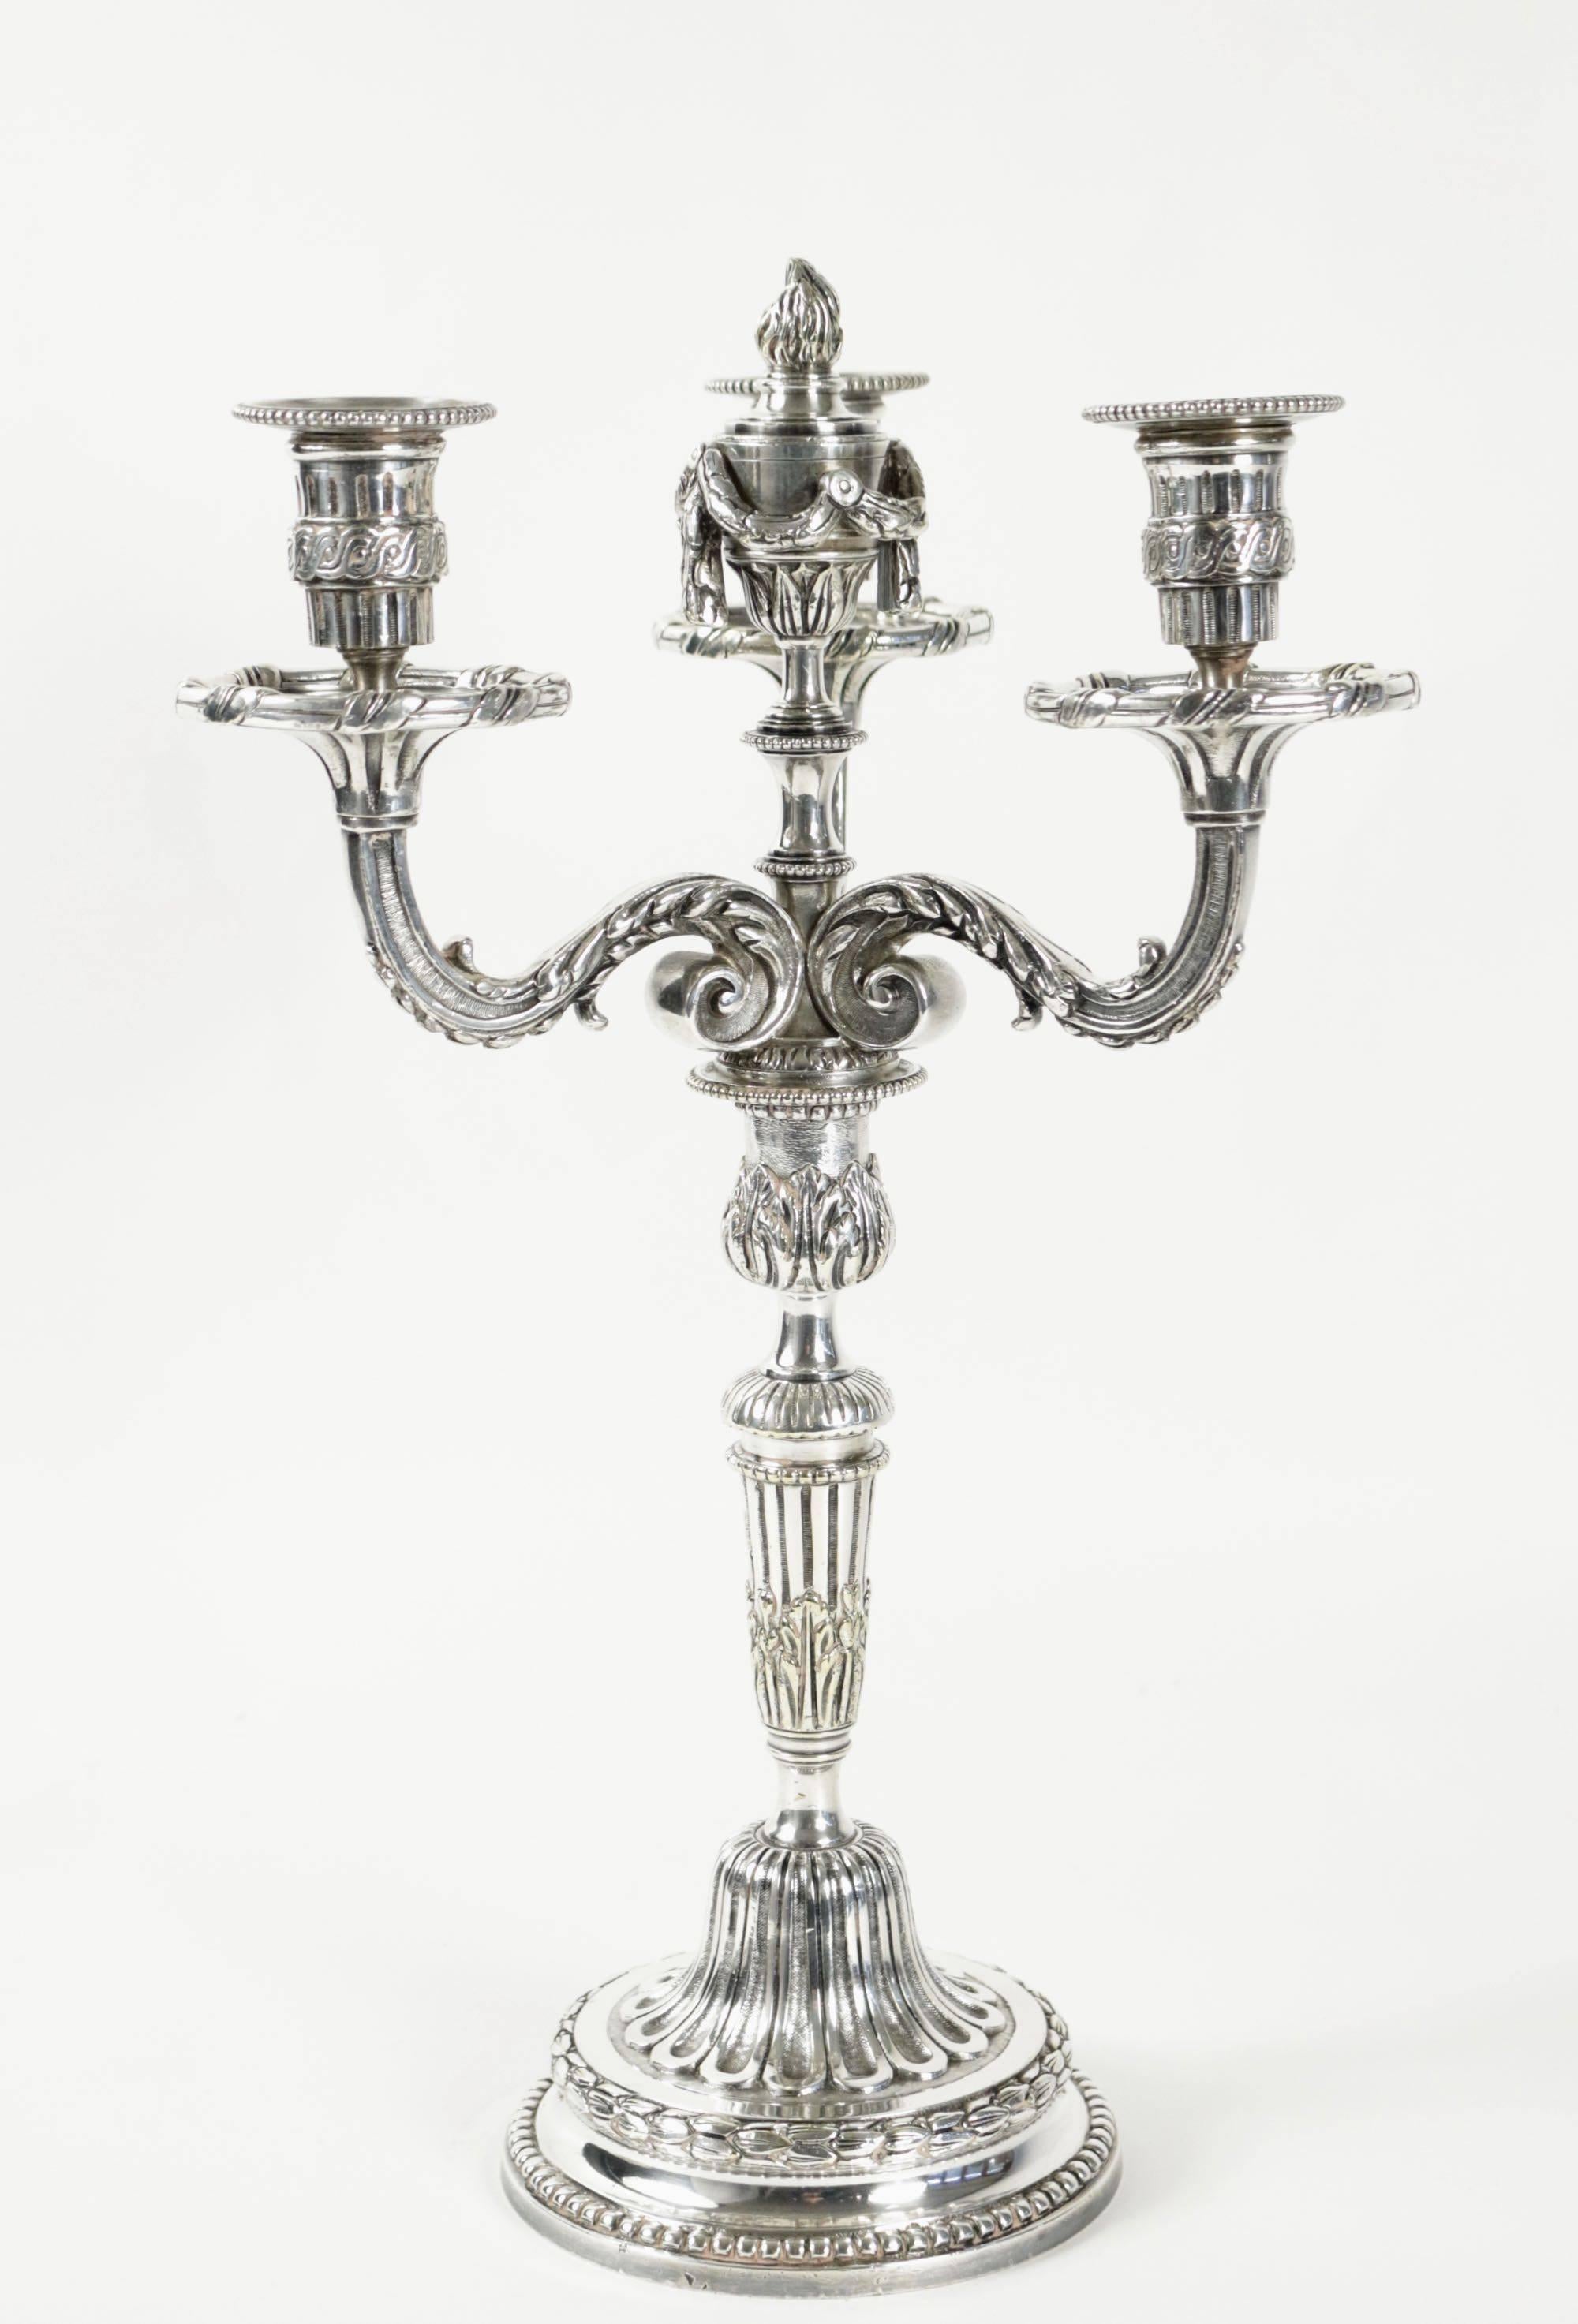 Two candelabras, three arms of lights, bronze silvered